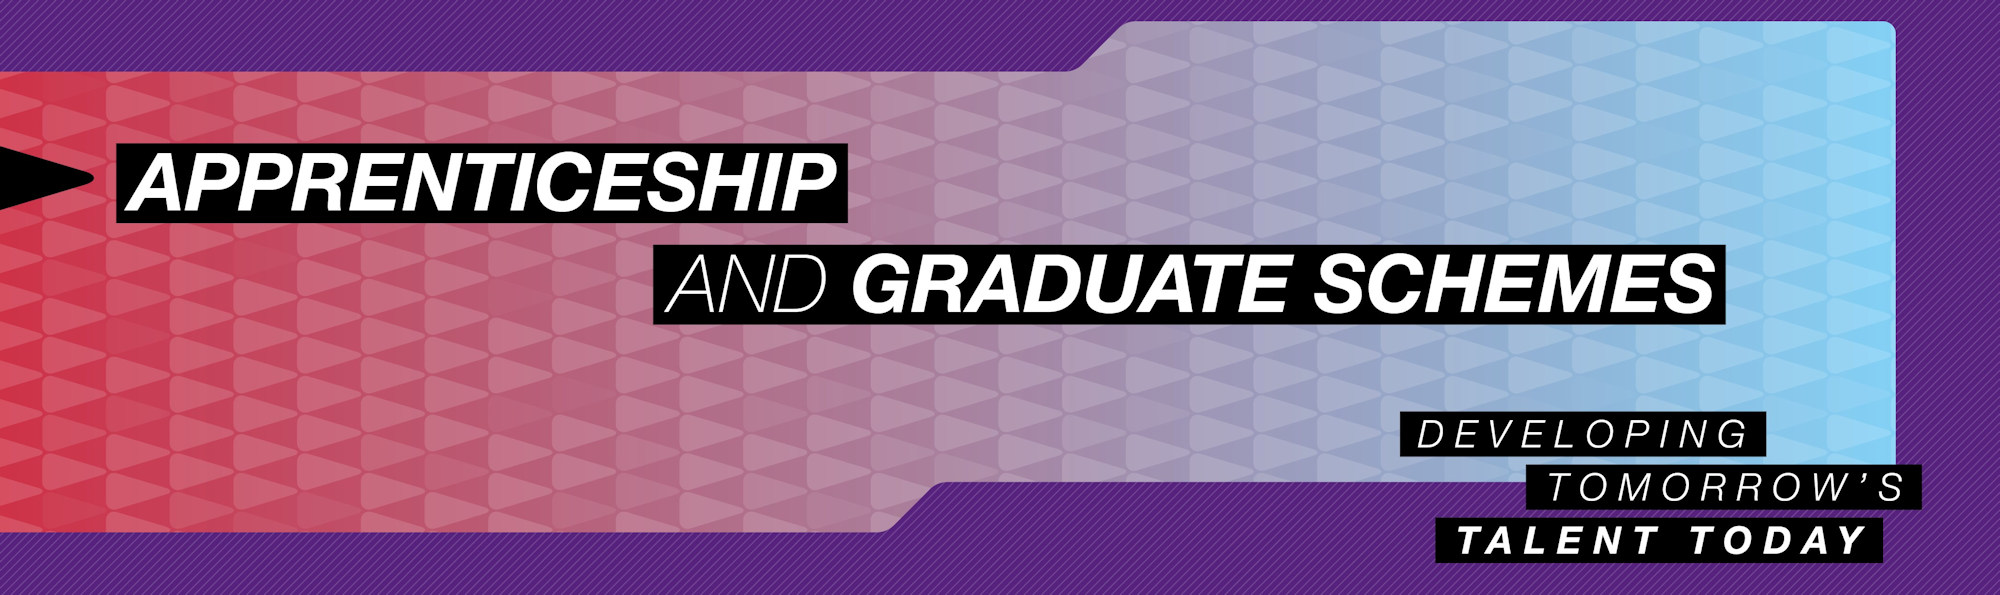 Apprenticeship and Graduate Schemes -developing tomorrow's talent today